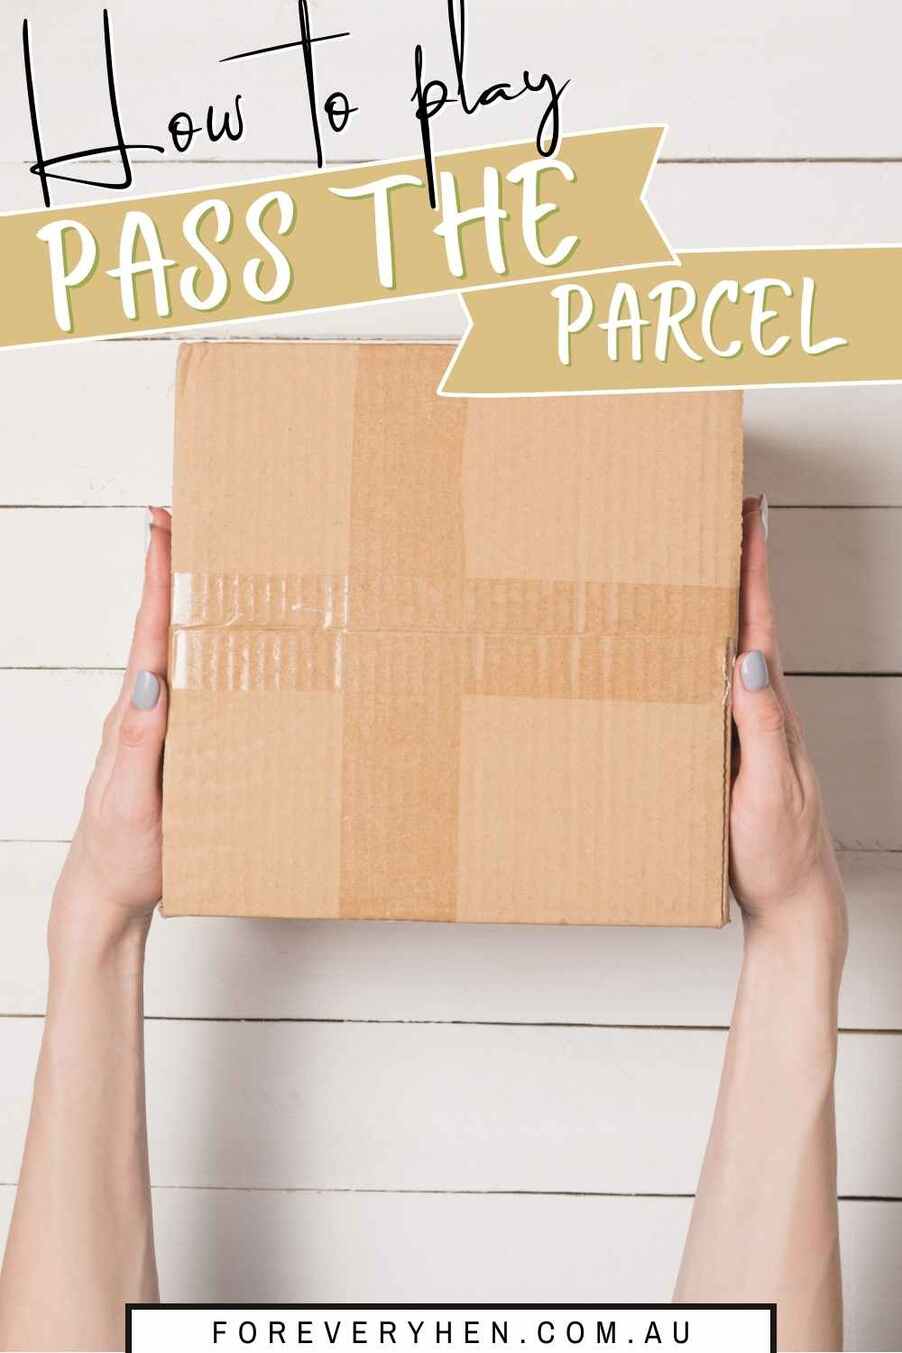 Image of a person's hands holding a parcel. Text overlay: how to play pass the parcel